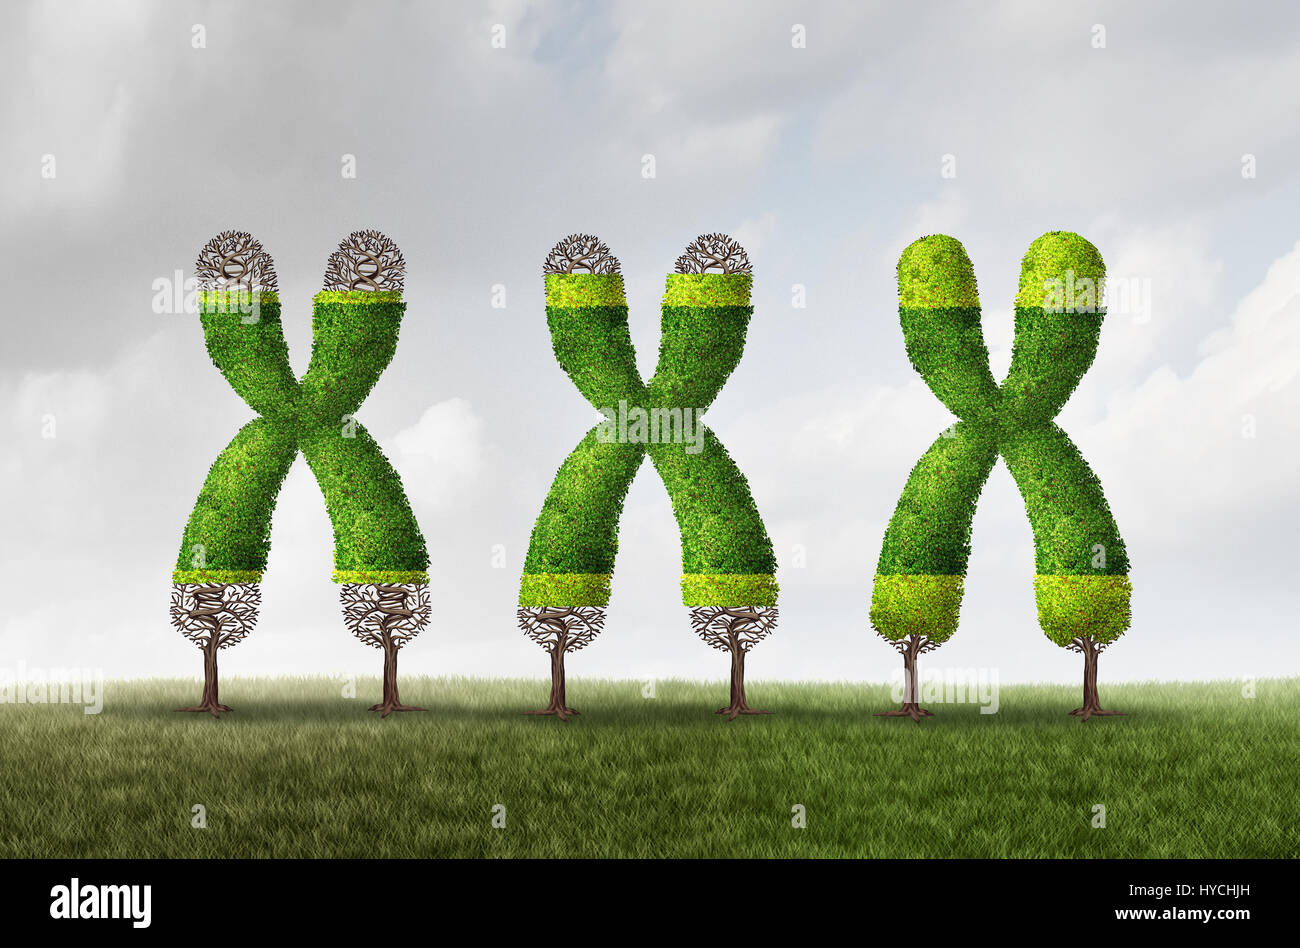 Telomere growth and longer length as a DNA medical concept as a chromosome tree with growing end caps as a symbol for aging. Stock Photo